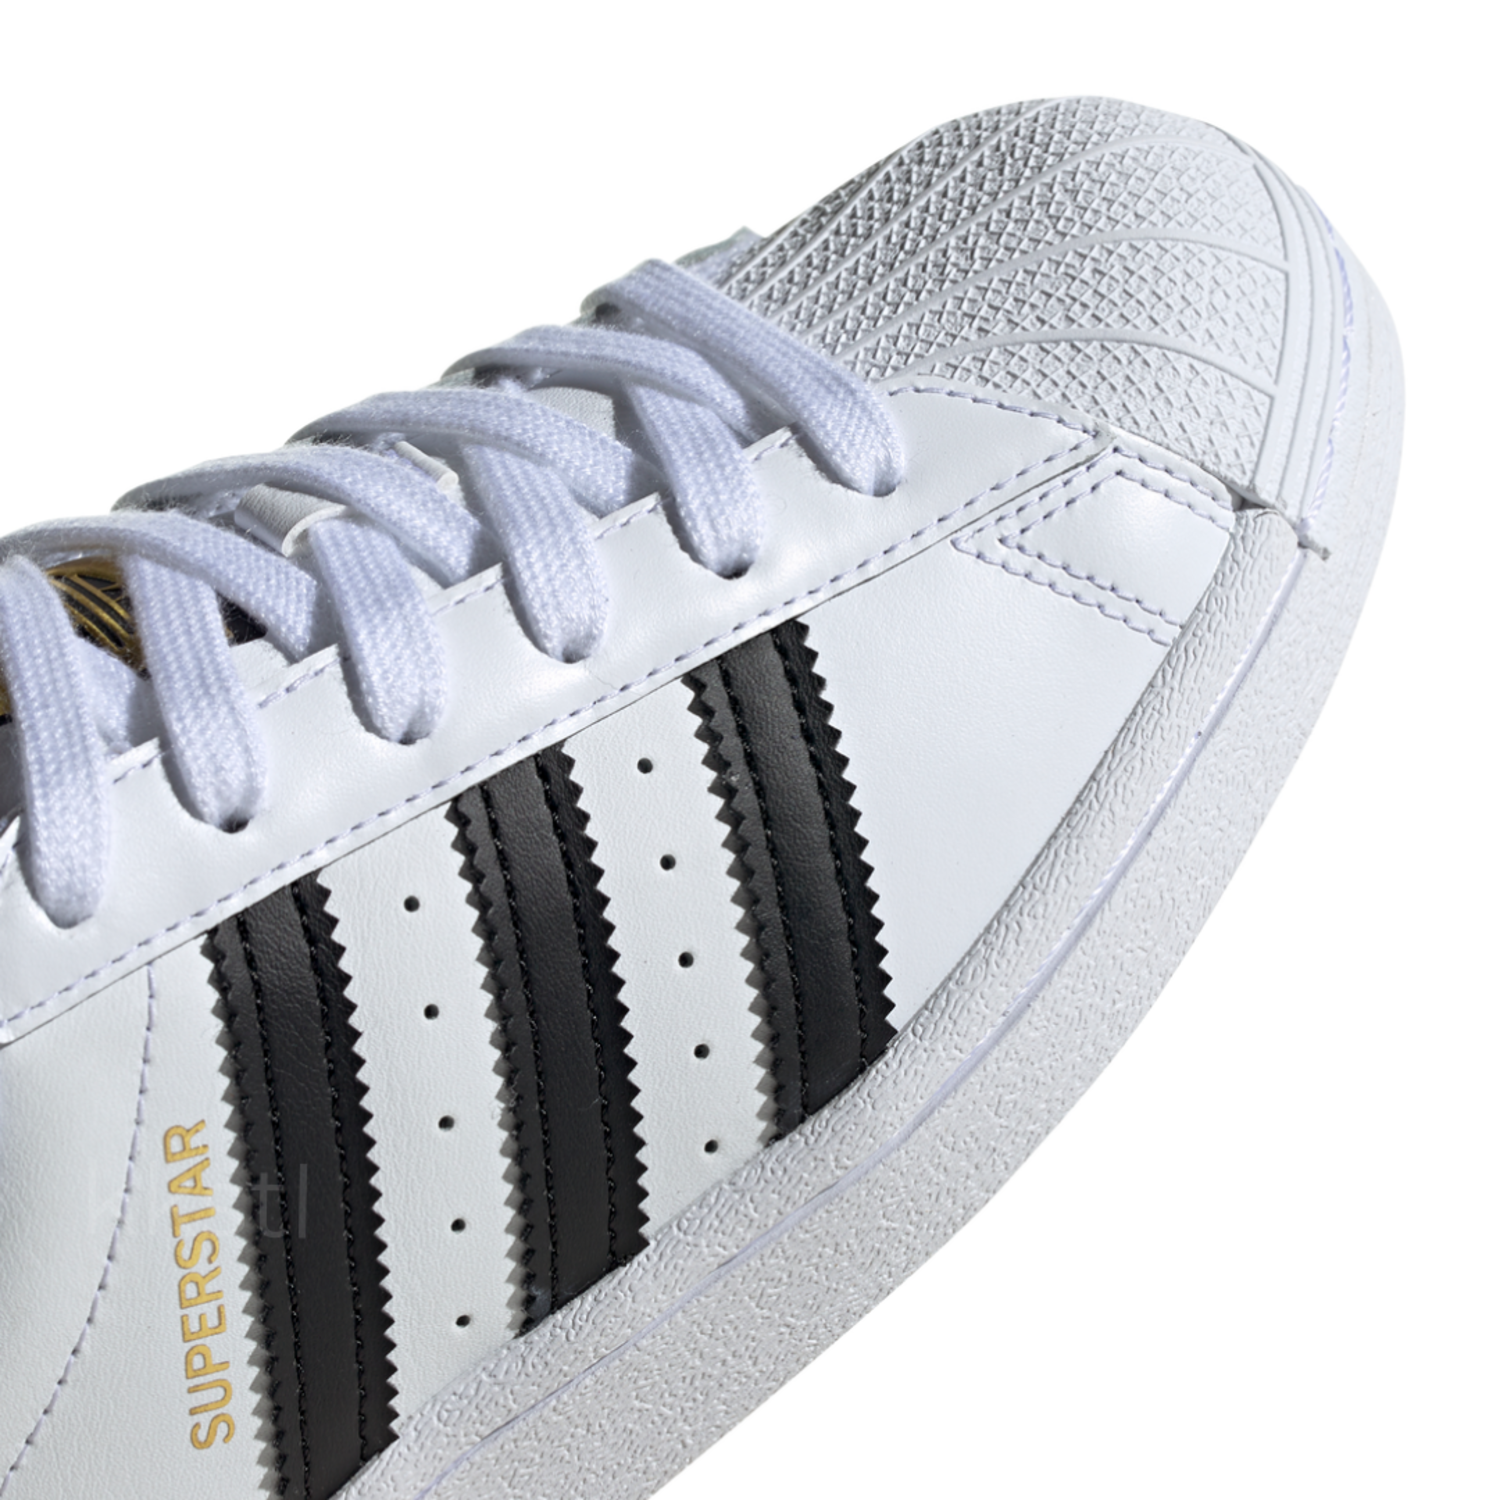 Adidas Superstar Sneakers Are On Sale For 25% Off On Amazon